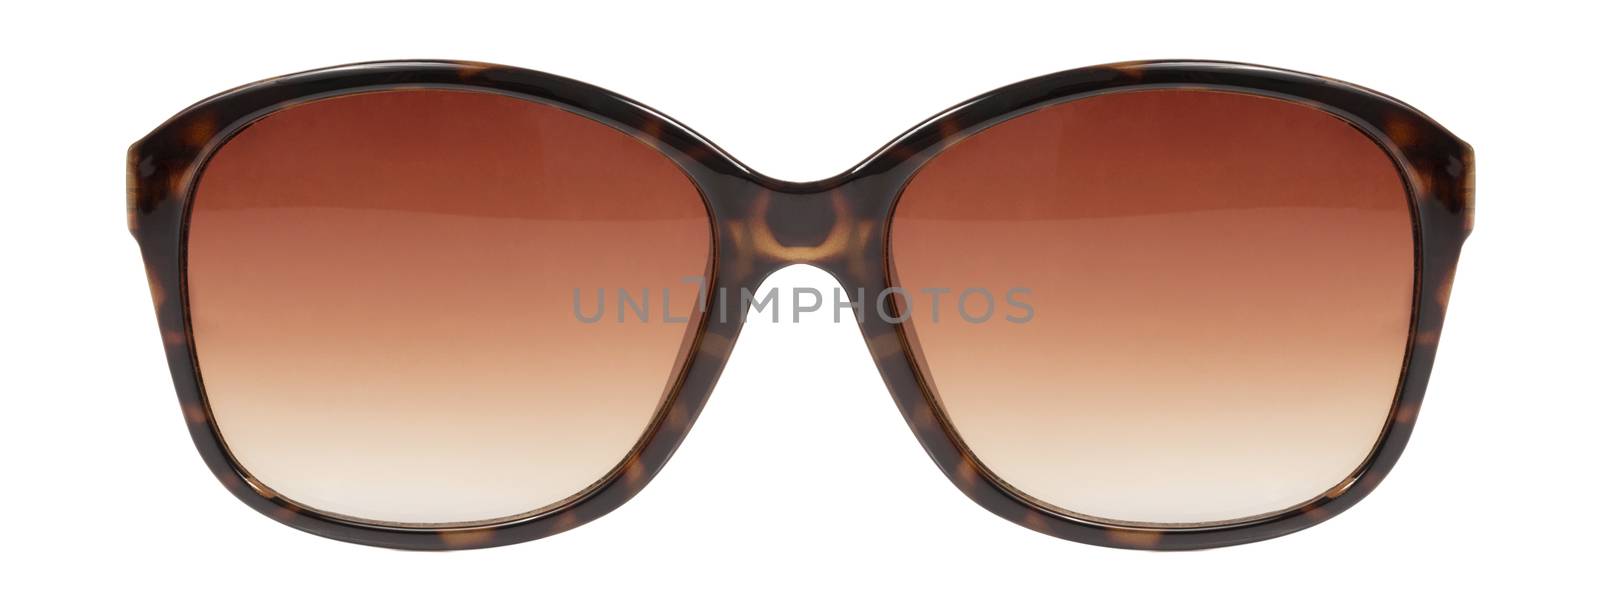 Sunglasses large brown tortois shell frame red lens color isolated against a clean white background nobody